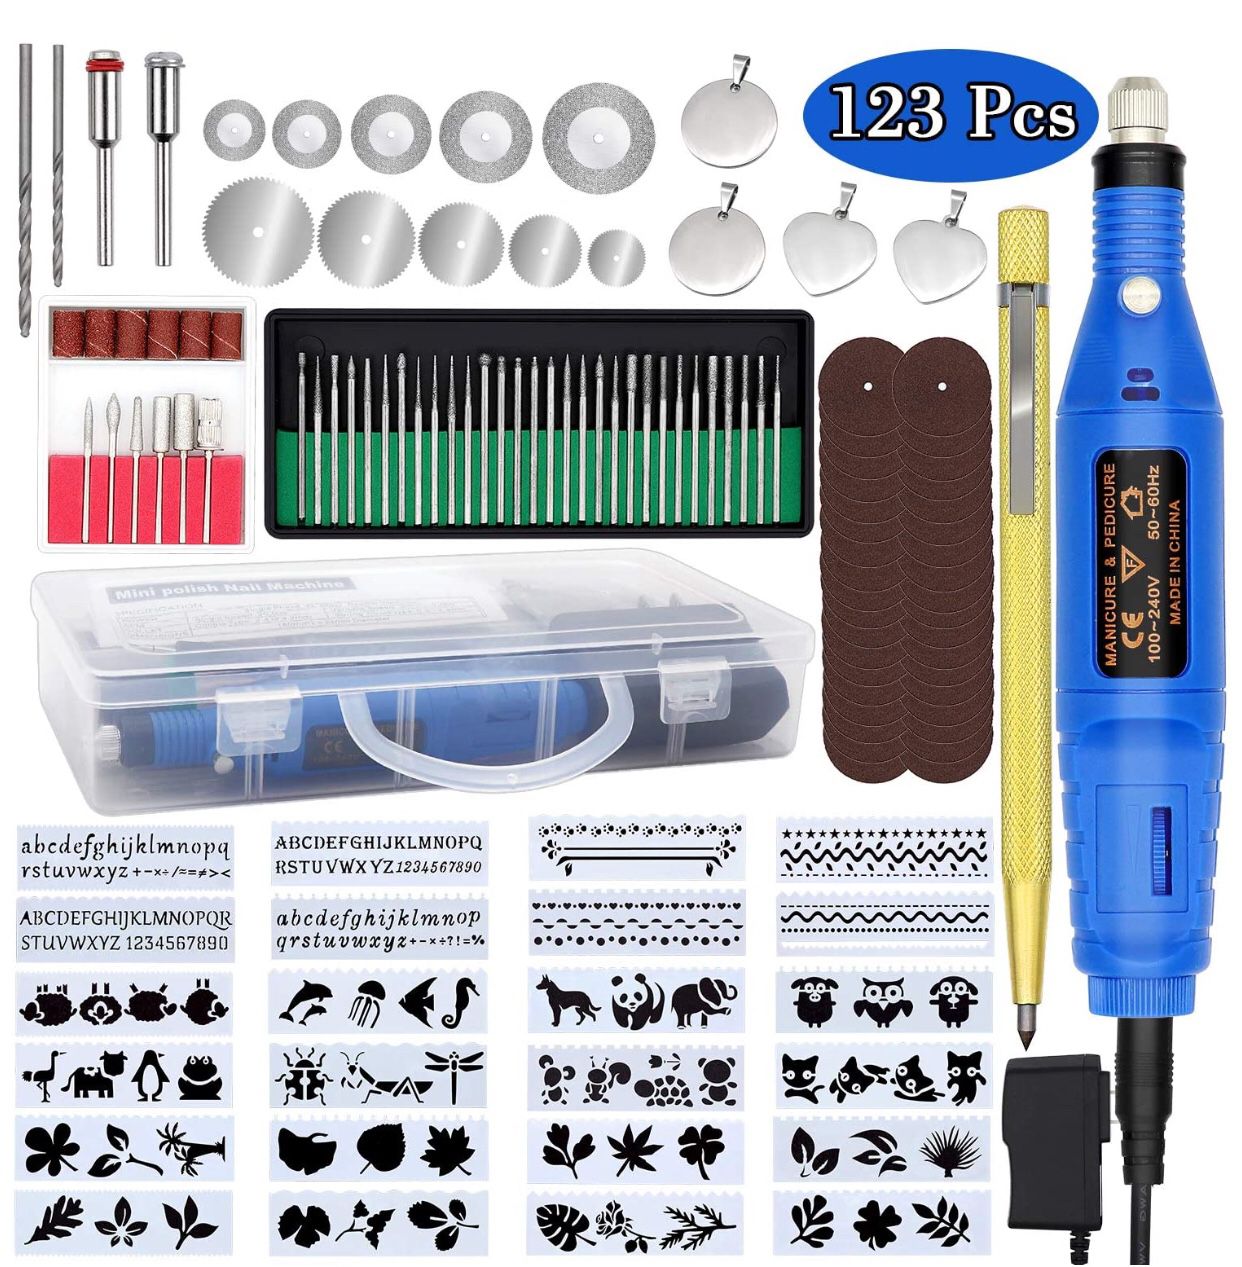 Engraving tool kit PLUS GET $2 OFF RIGHT NOW